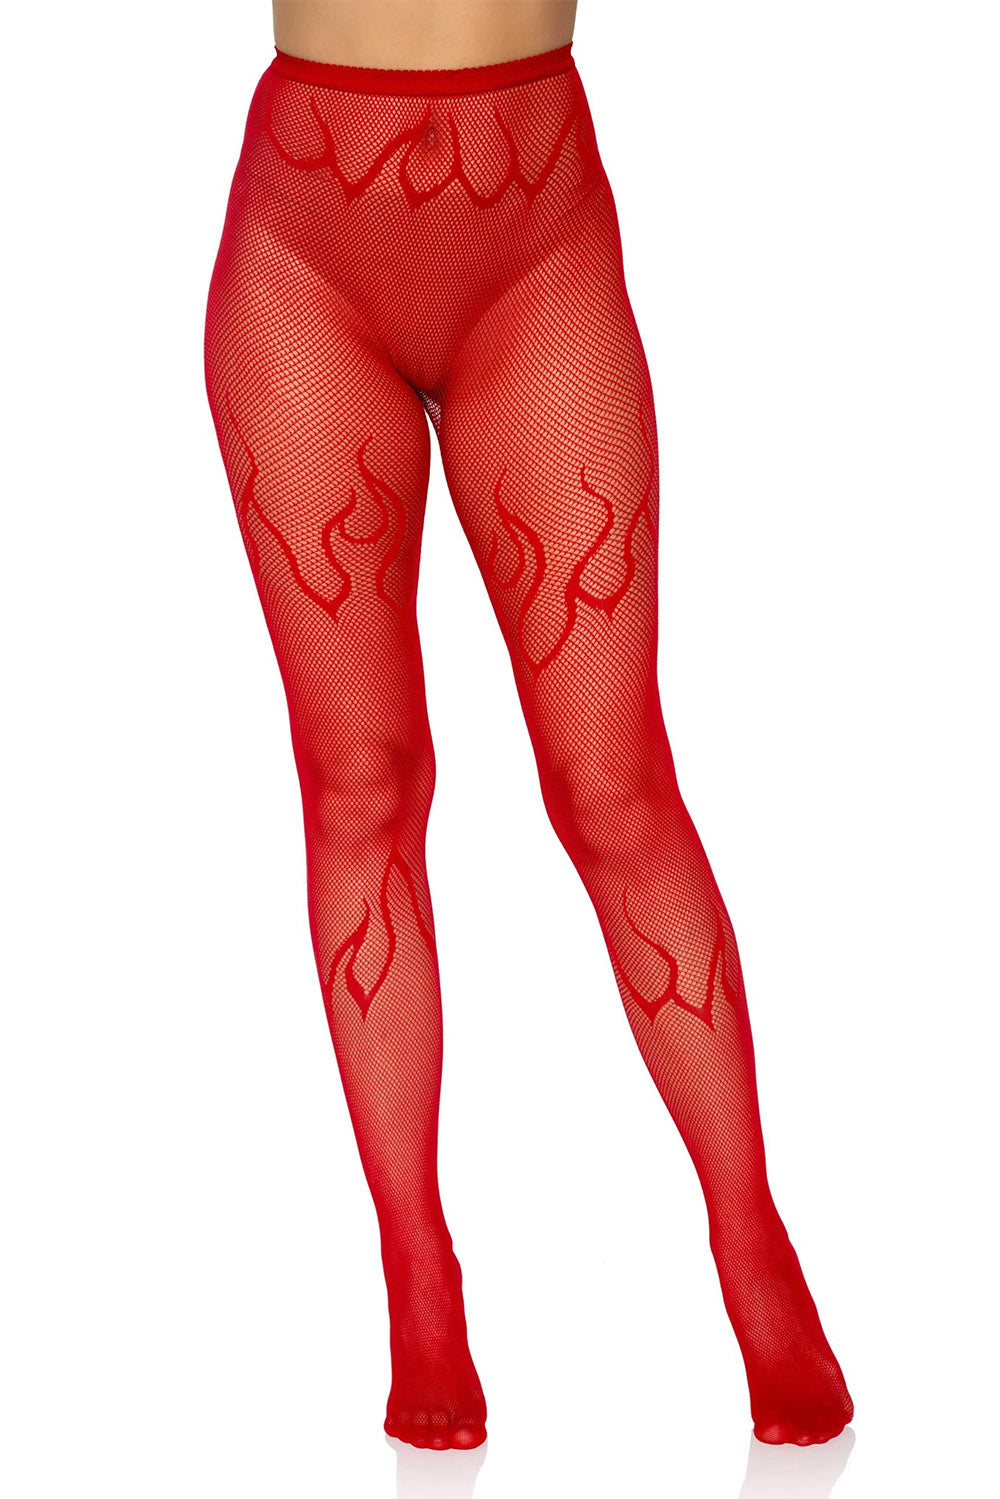 Light My Fire Fishnet Tights[Red]